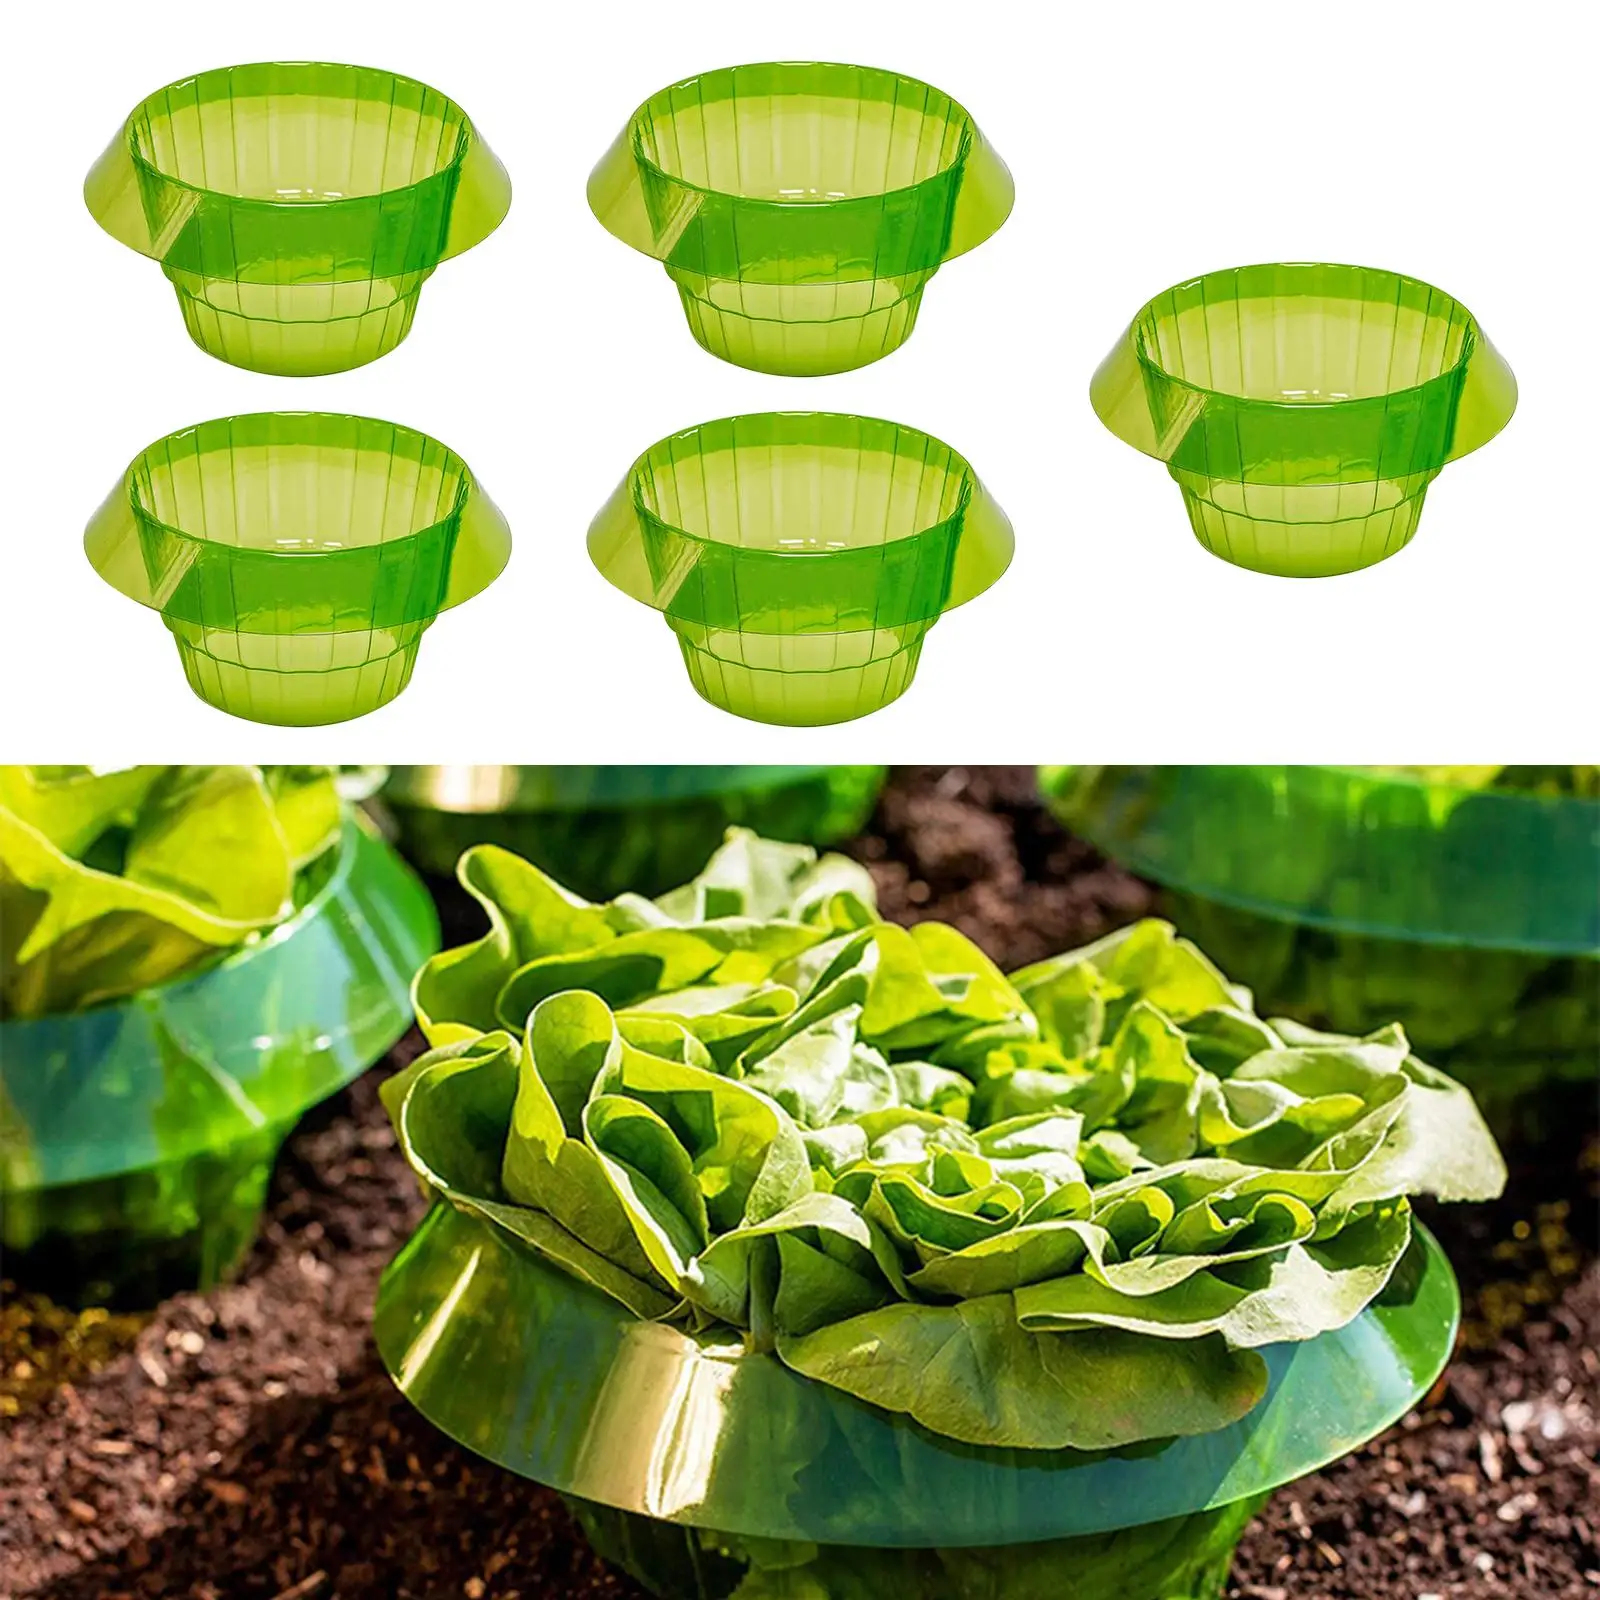 Durable Flowers Protective Cover Protection Barrier Plants Protective Collars for Vegetables